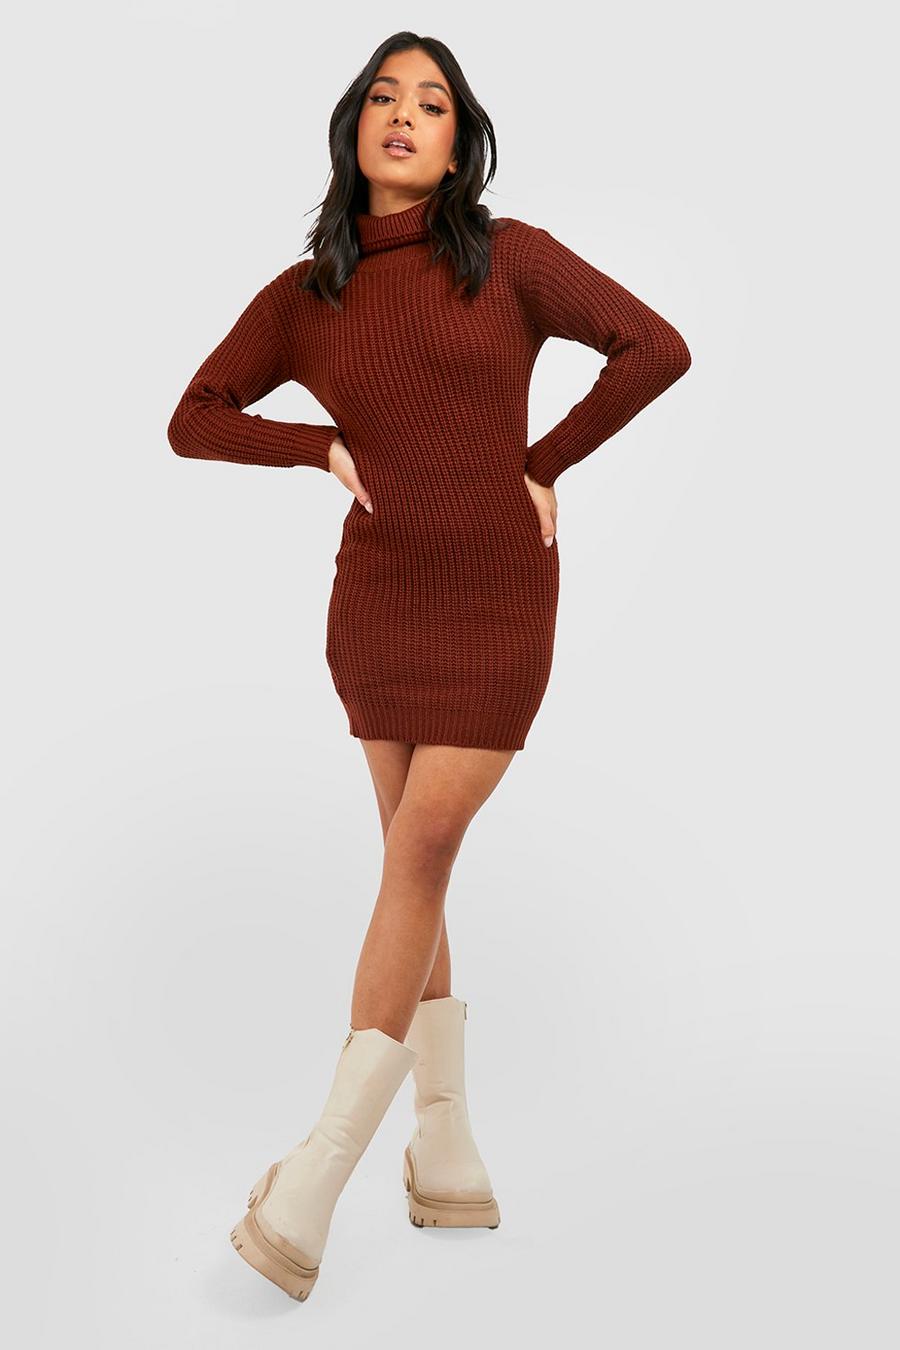 Mahogany brown Recycled Petite Roll Neck Jumper Dress